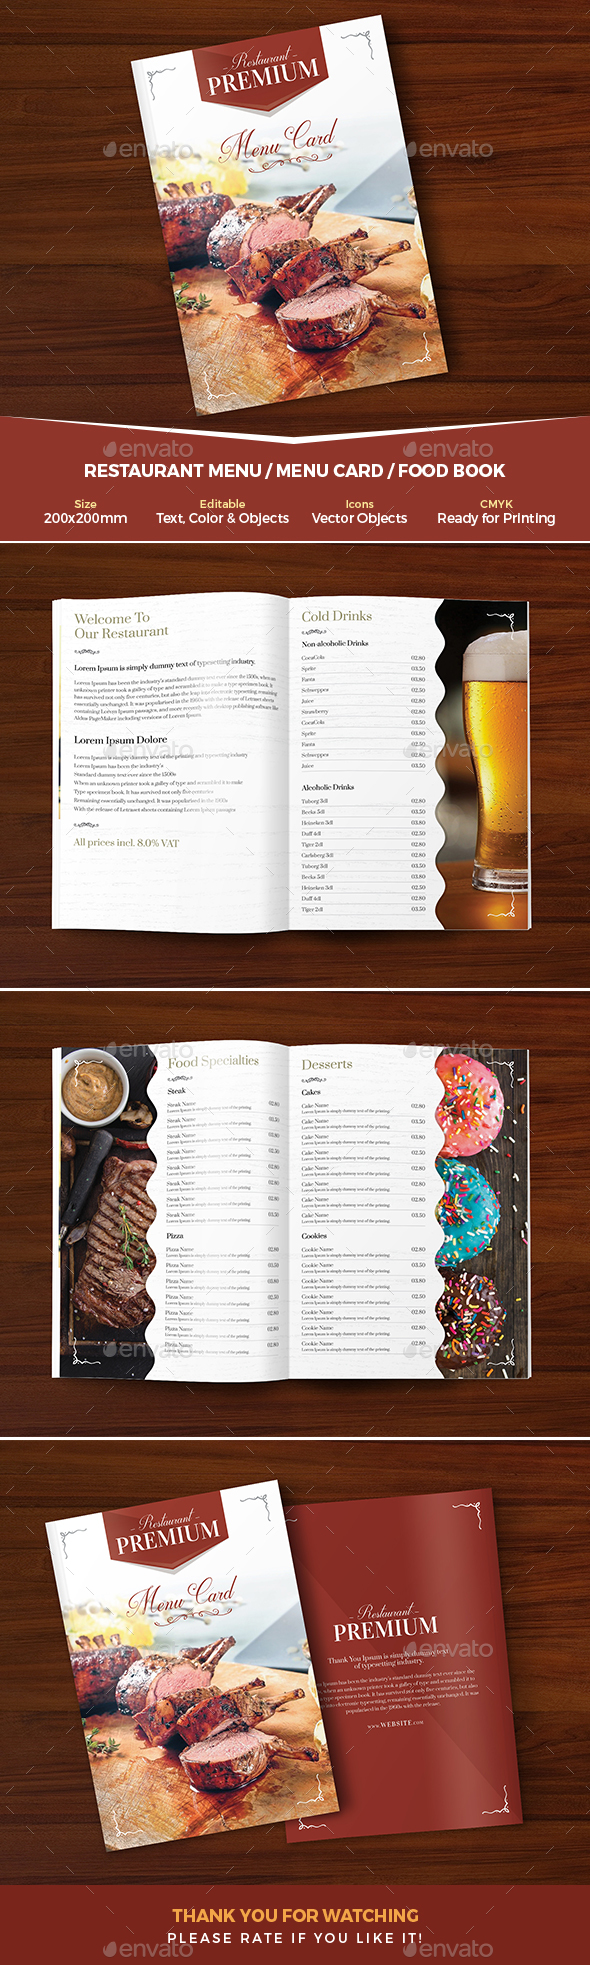 Menu Card Graphics Designs Templates From Graphicriver